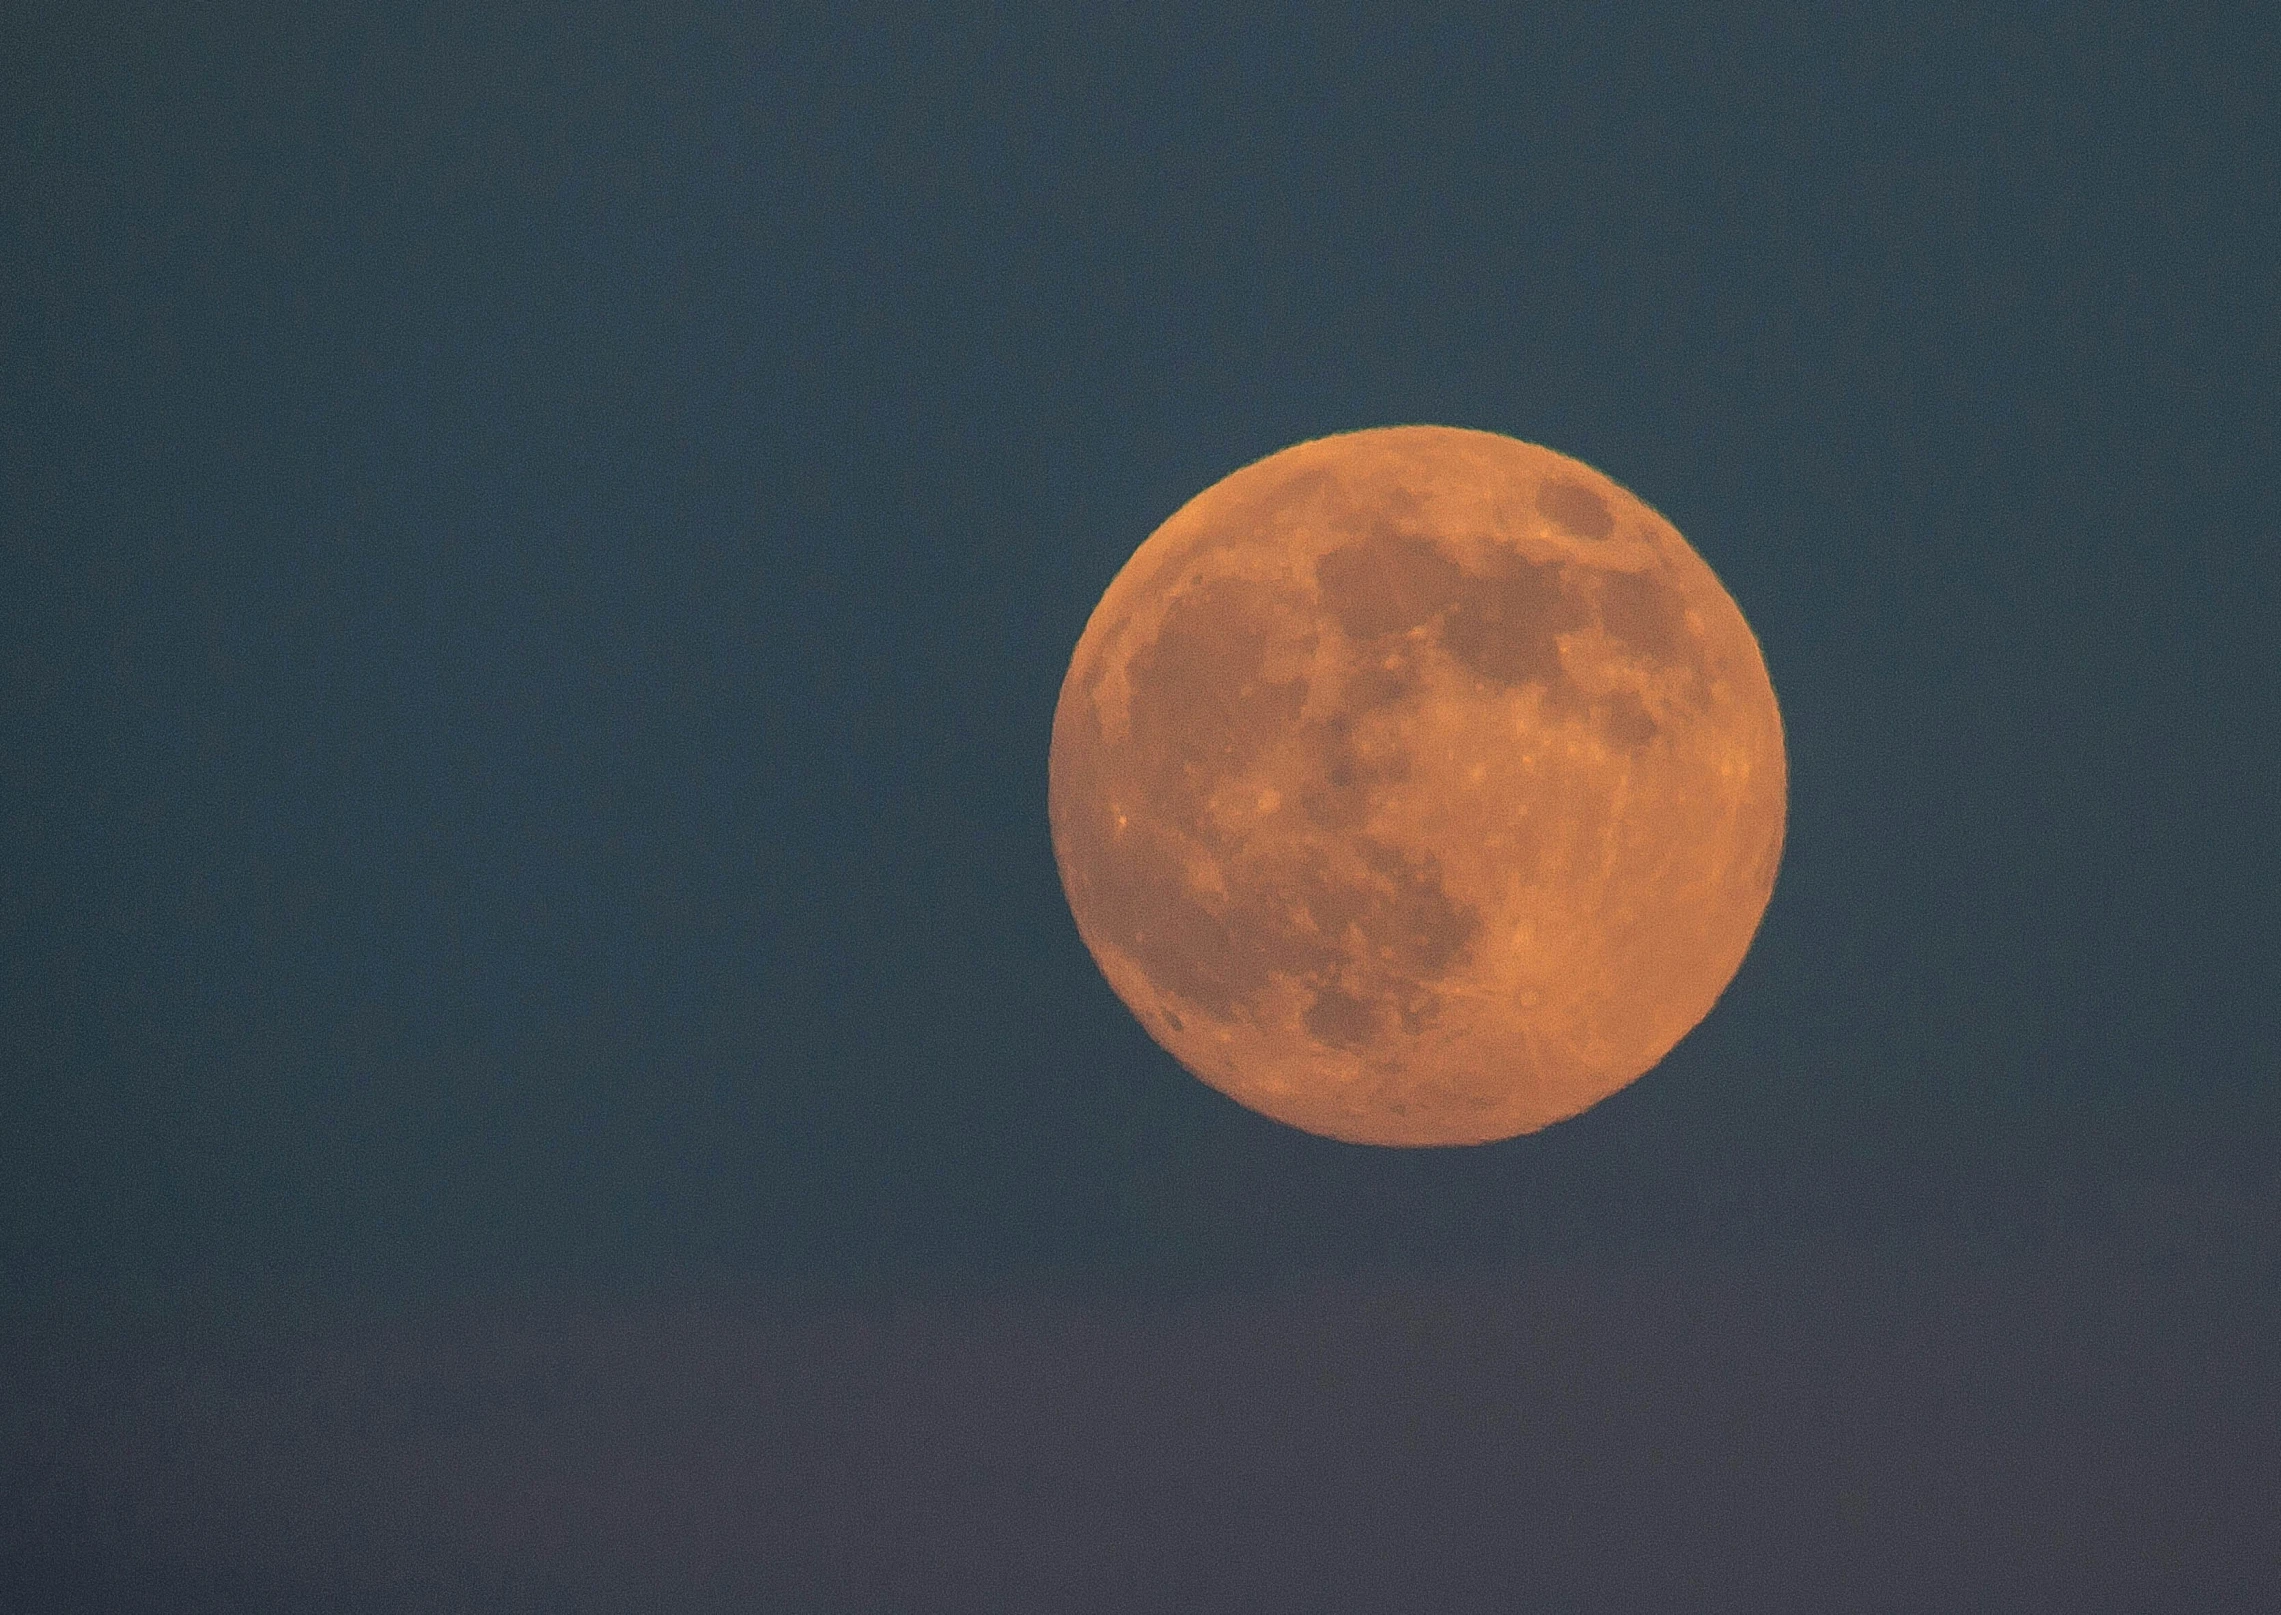 the moon that is very large, bright and orange